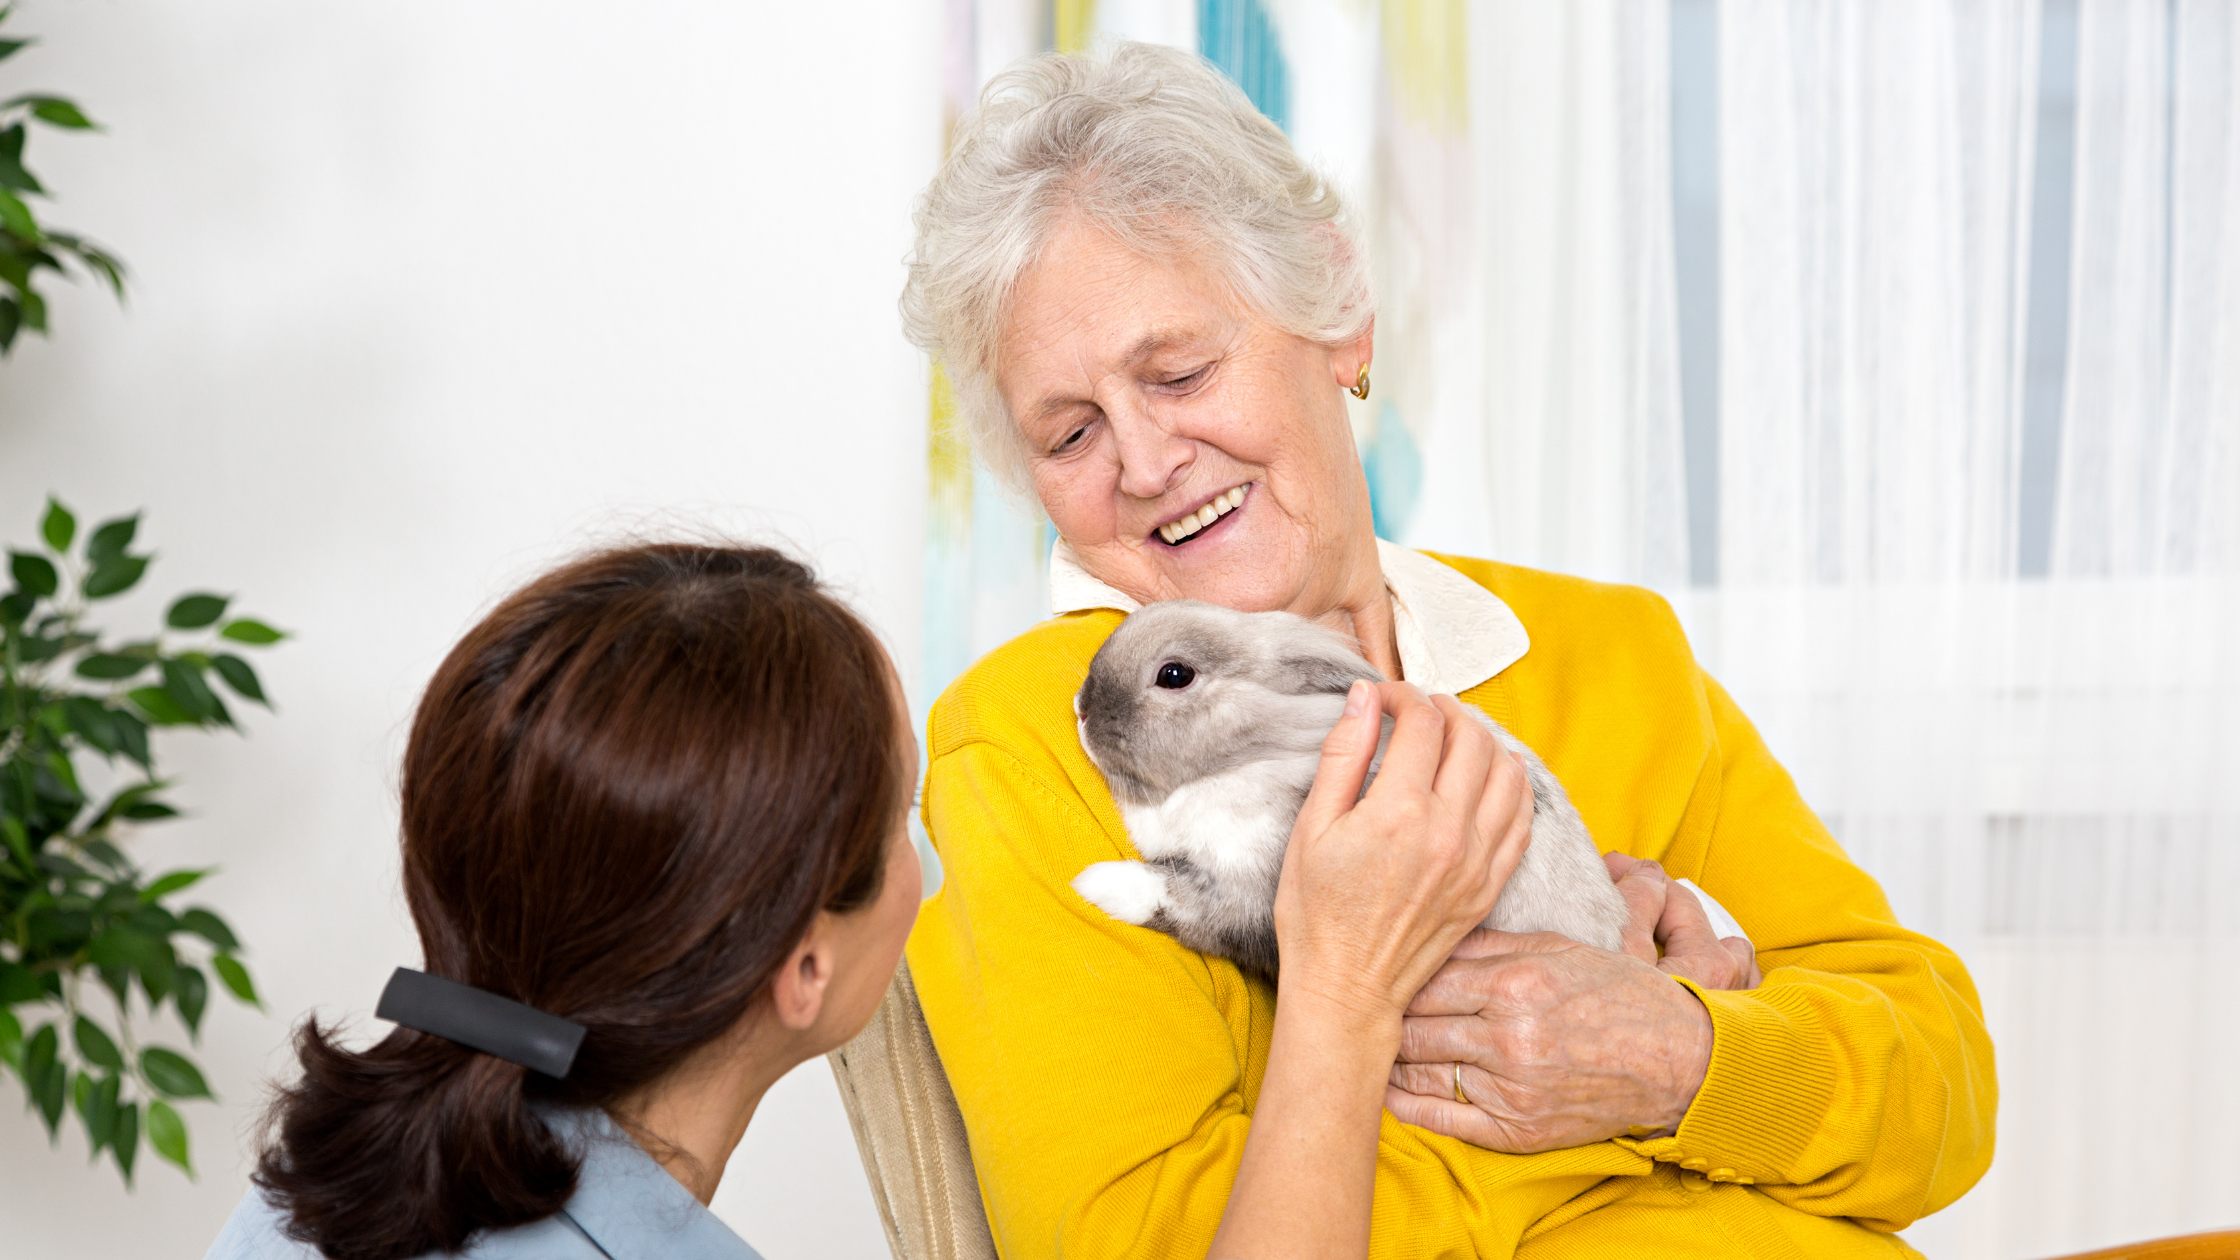 Older woman laughing while holding a bunny 